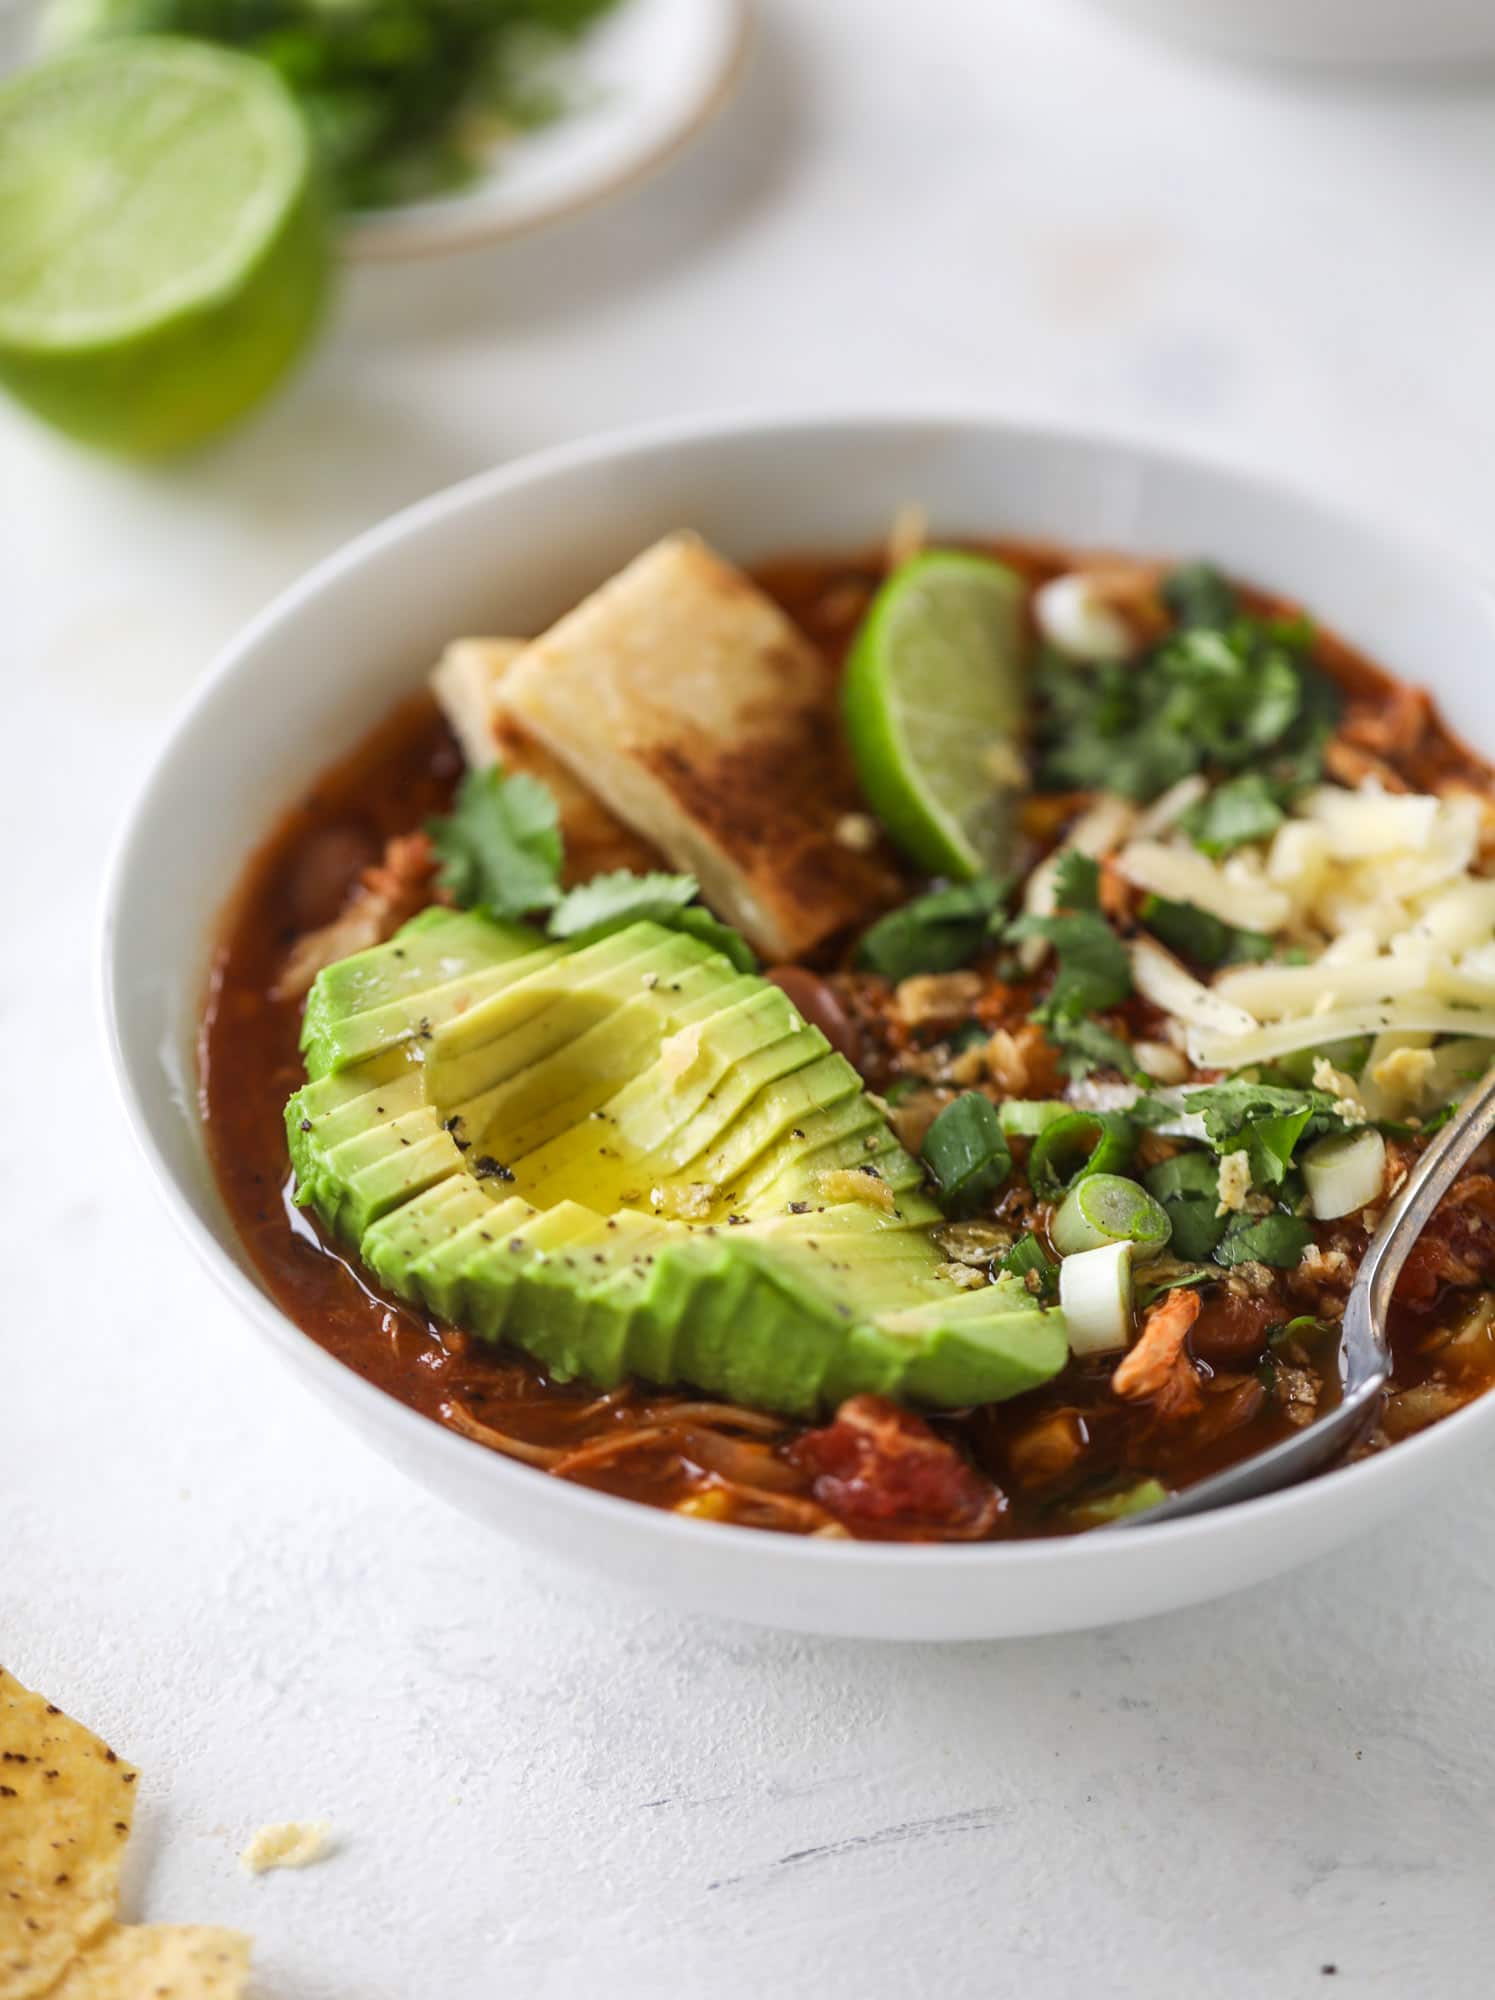 This flavorful chicken taco soup can be made on the stovetop or in the slow cooker. It's hearty and topped with cheese quesadilla croutons! I howsweeteats.com #chicken #tacosoup